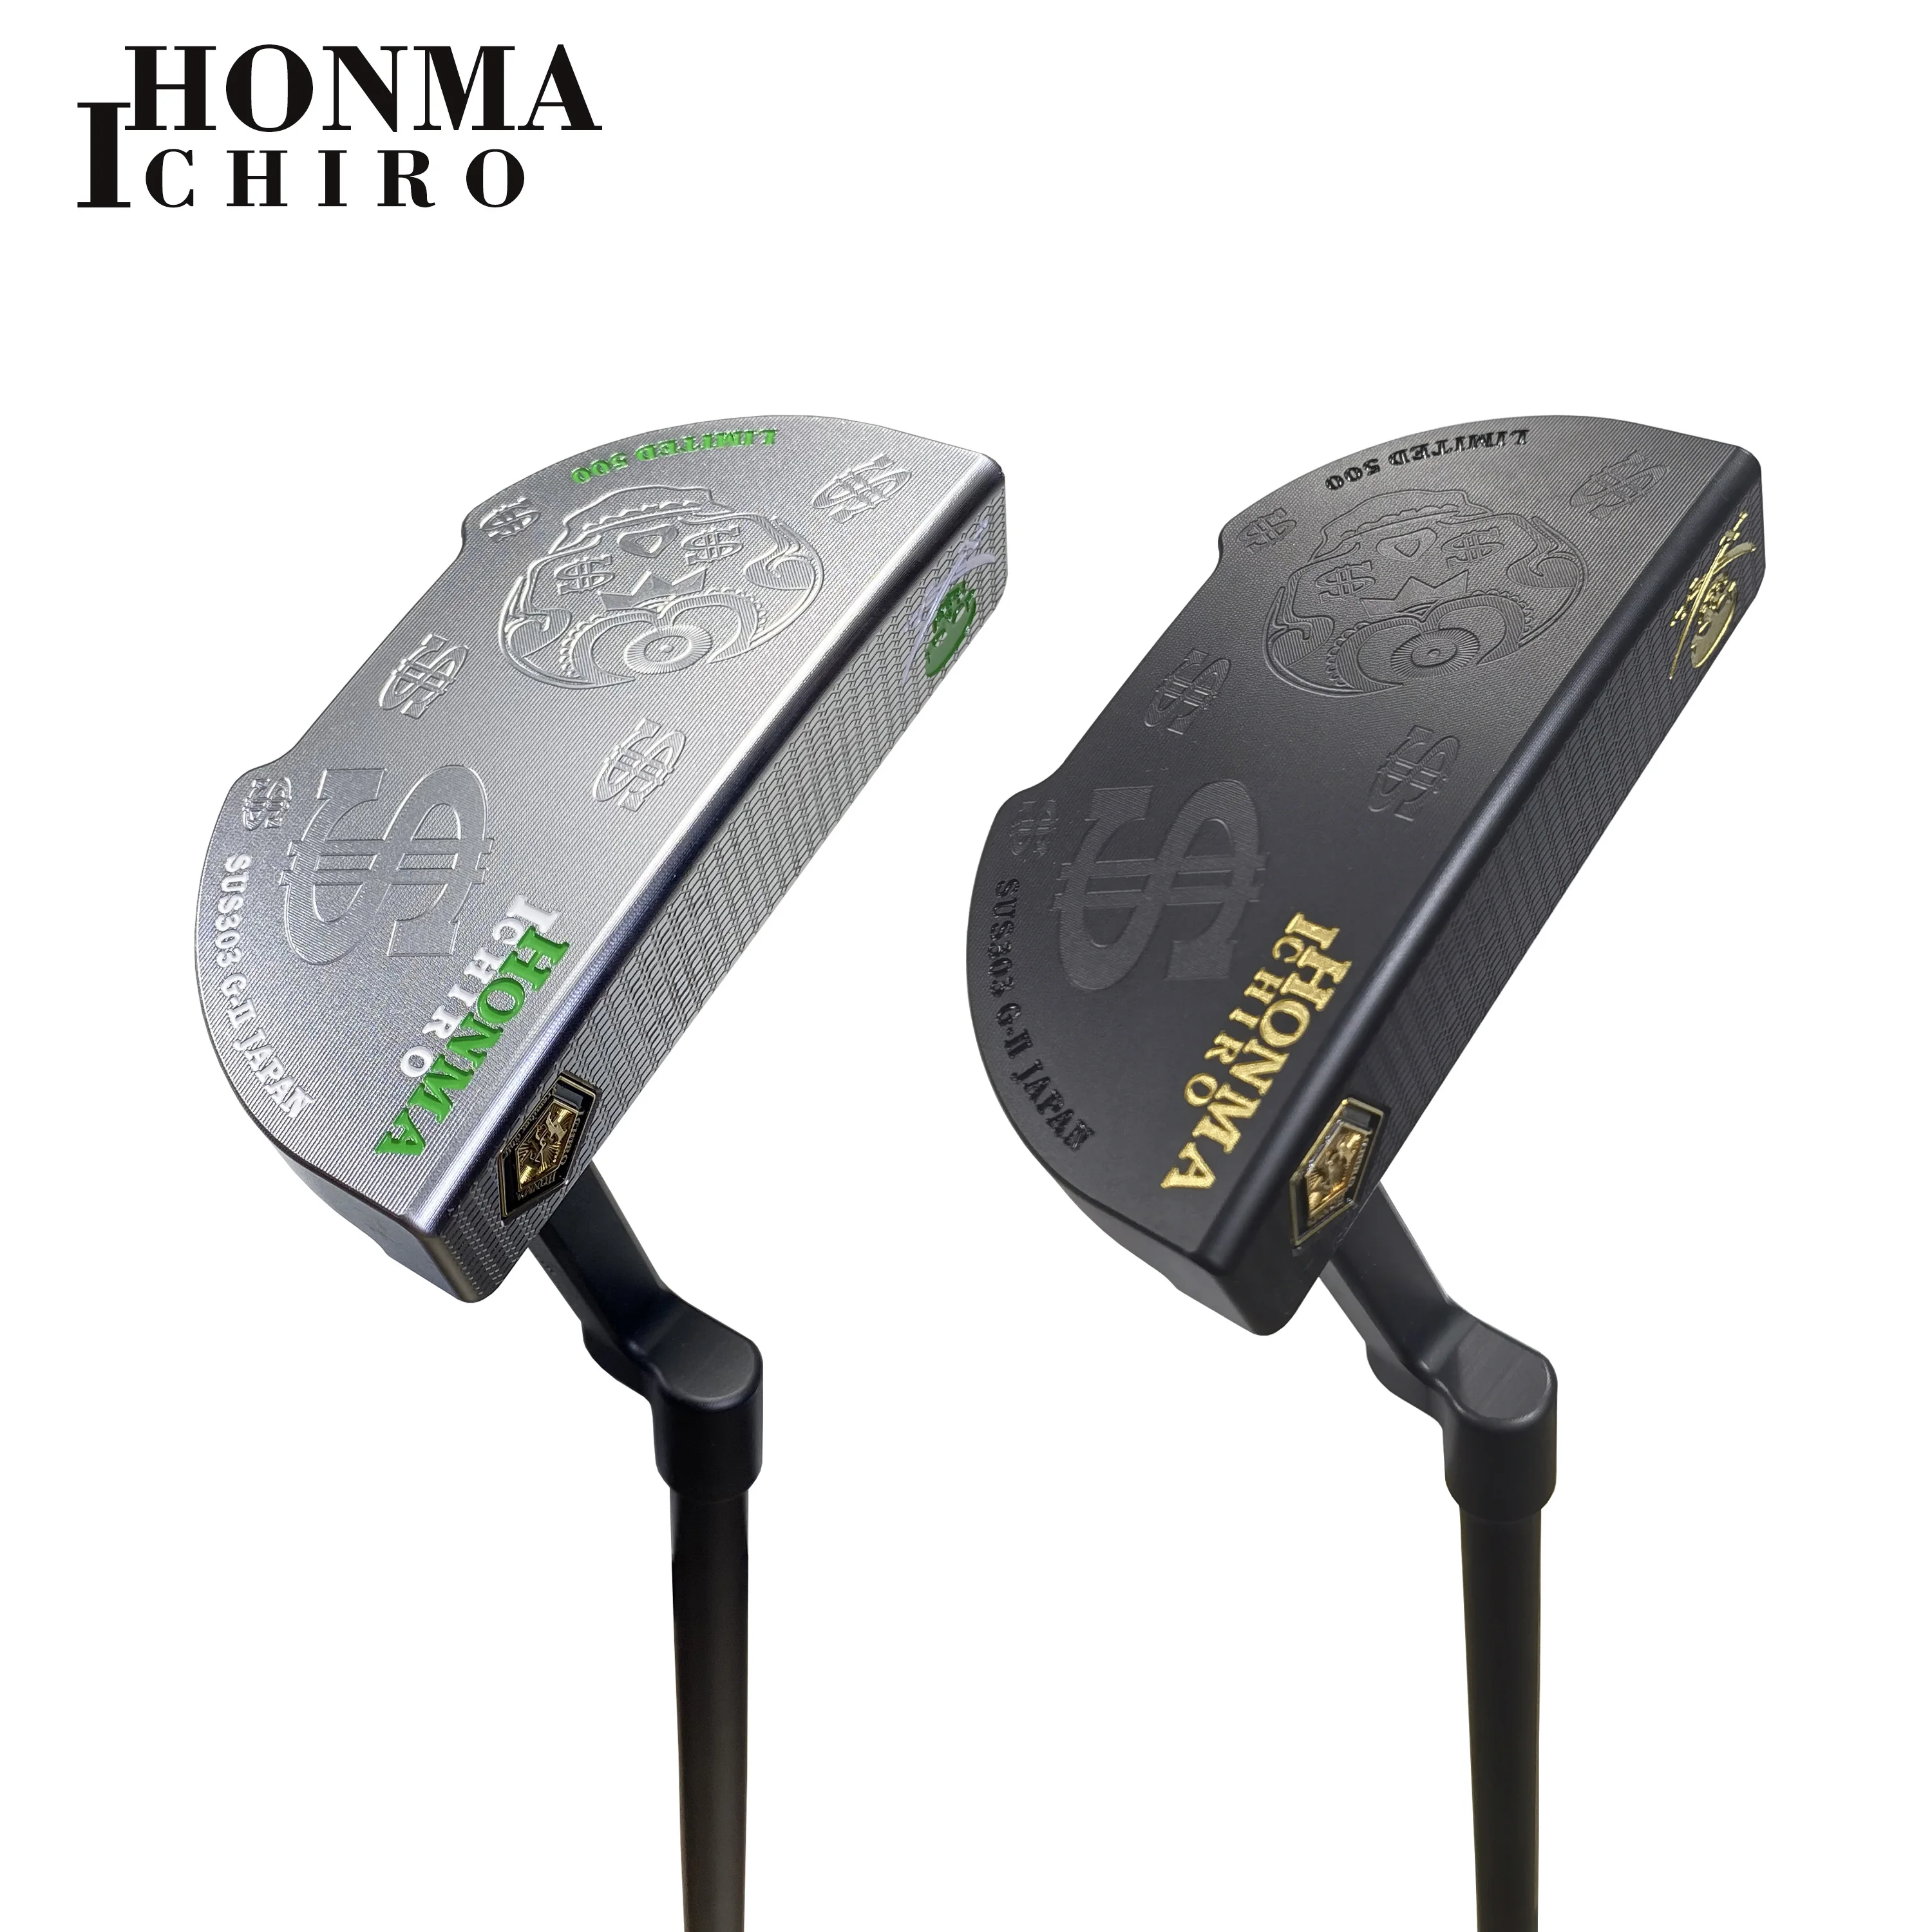 ICHIRO HONMA Golf Clubs New Limited Edition G-II Semicircle Putters 33/34/35inch with Shaft Headcover